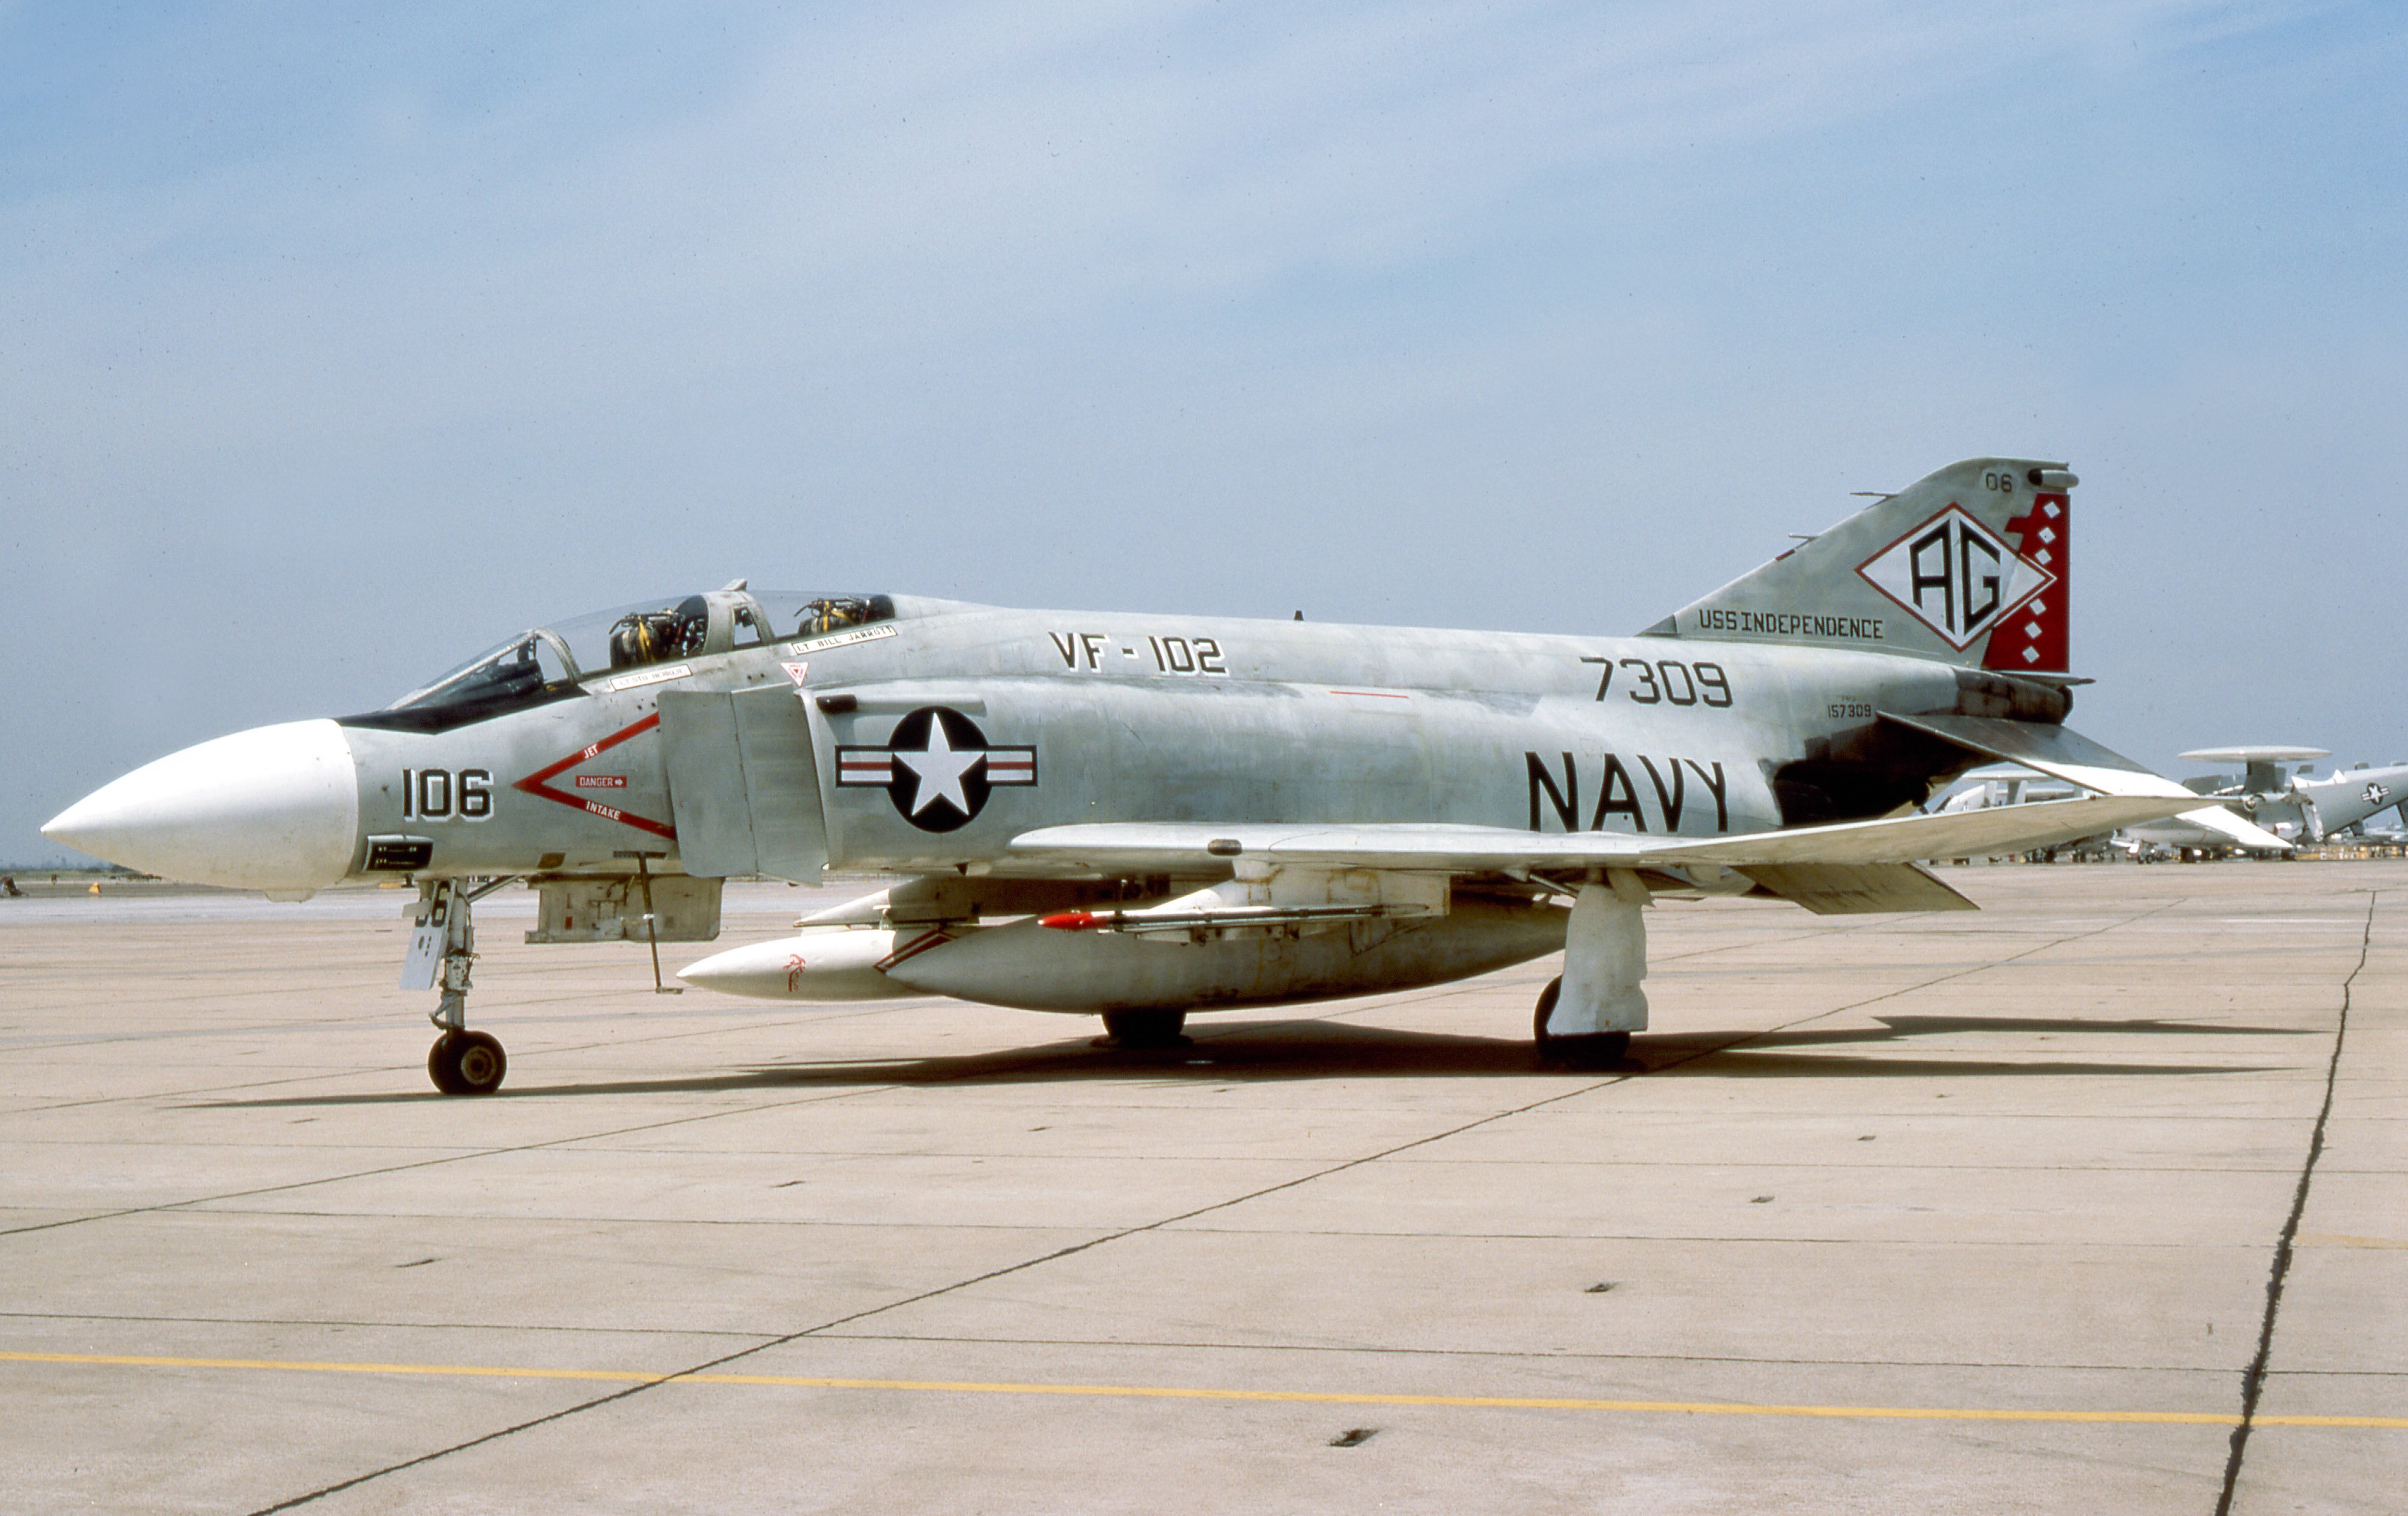 You Can Now Buy Your Very Own F 4 Phantom Fighter Jet For A Total Steal